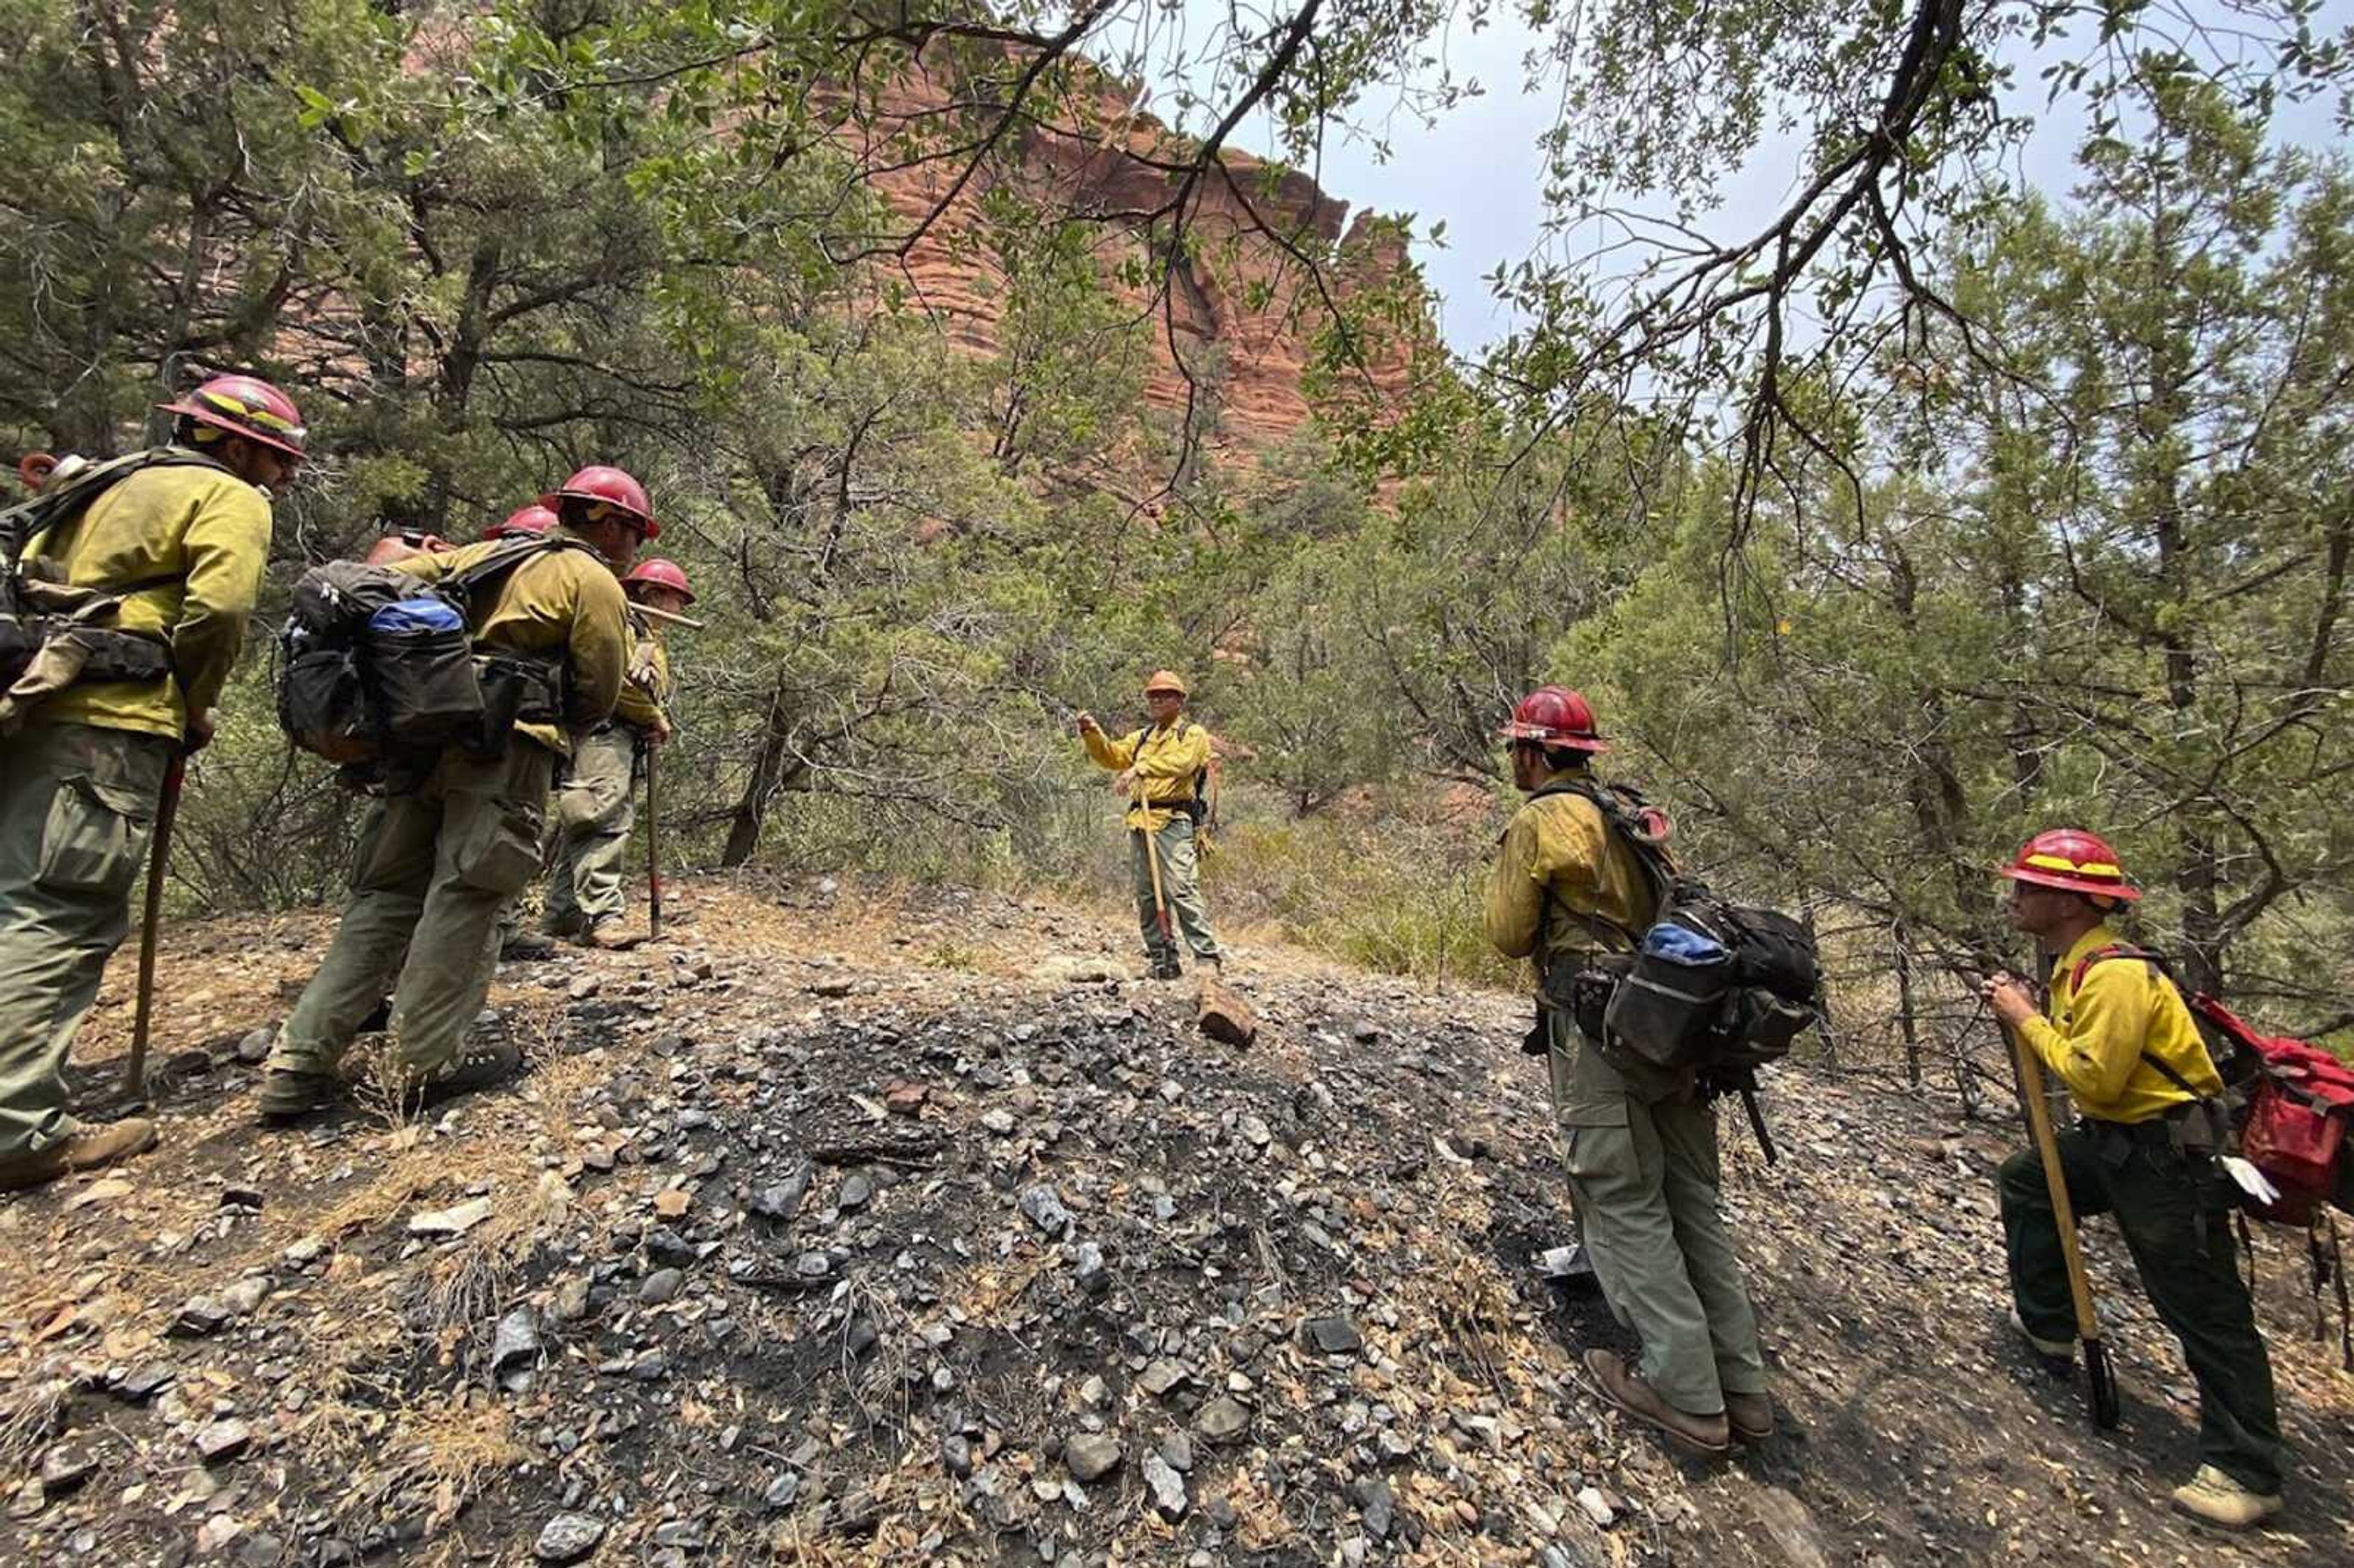 Jason Nez, center, talks to wildland fire personnel working a blaze in 2021 in northern Arizona. Nez is a Navajo archaeologist and firefighter who advises fire officials on how to protect archaeological resources.